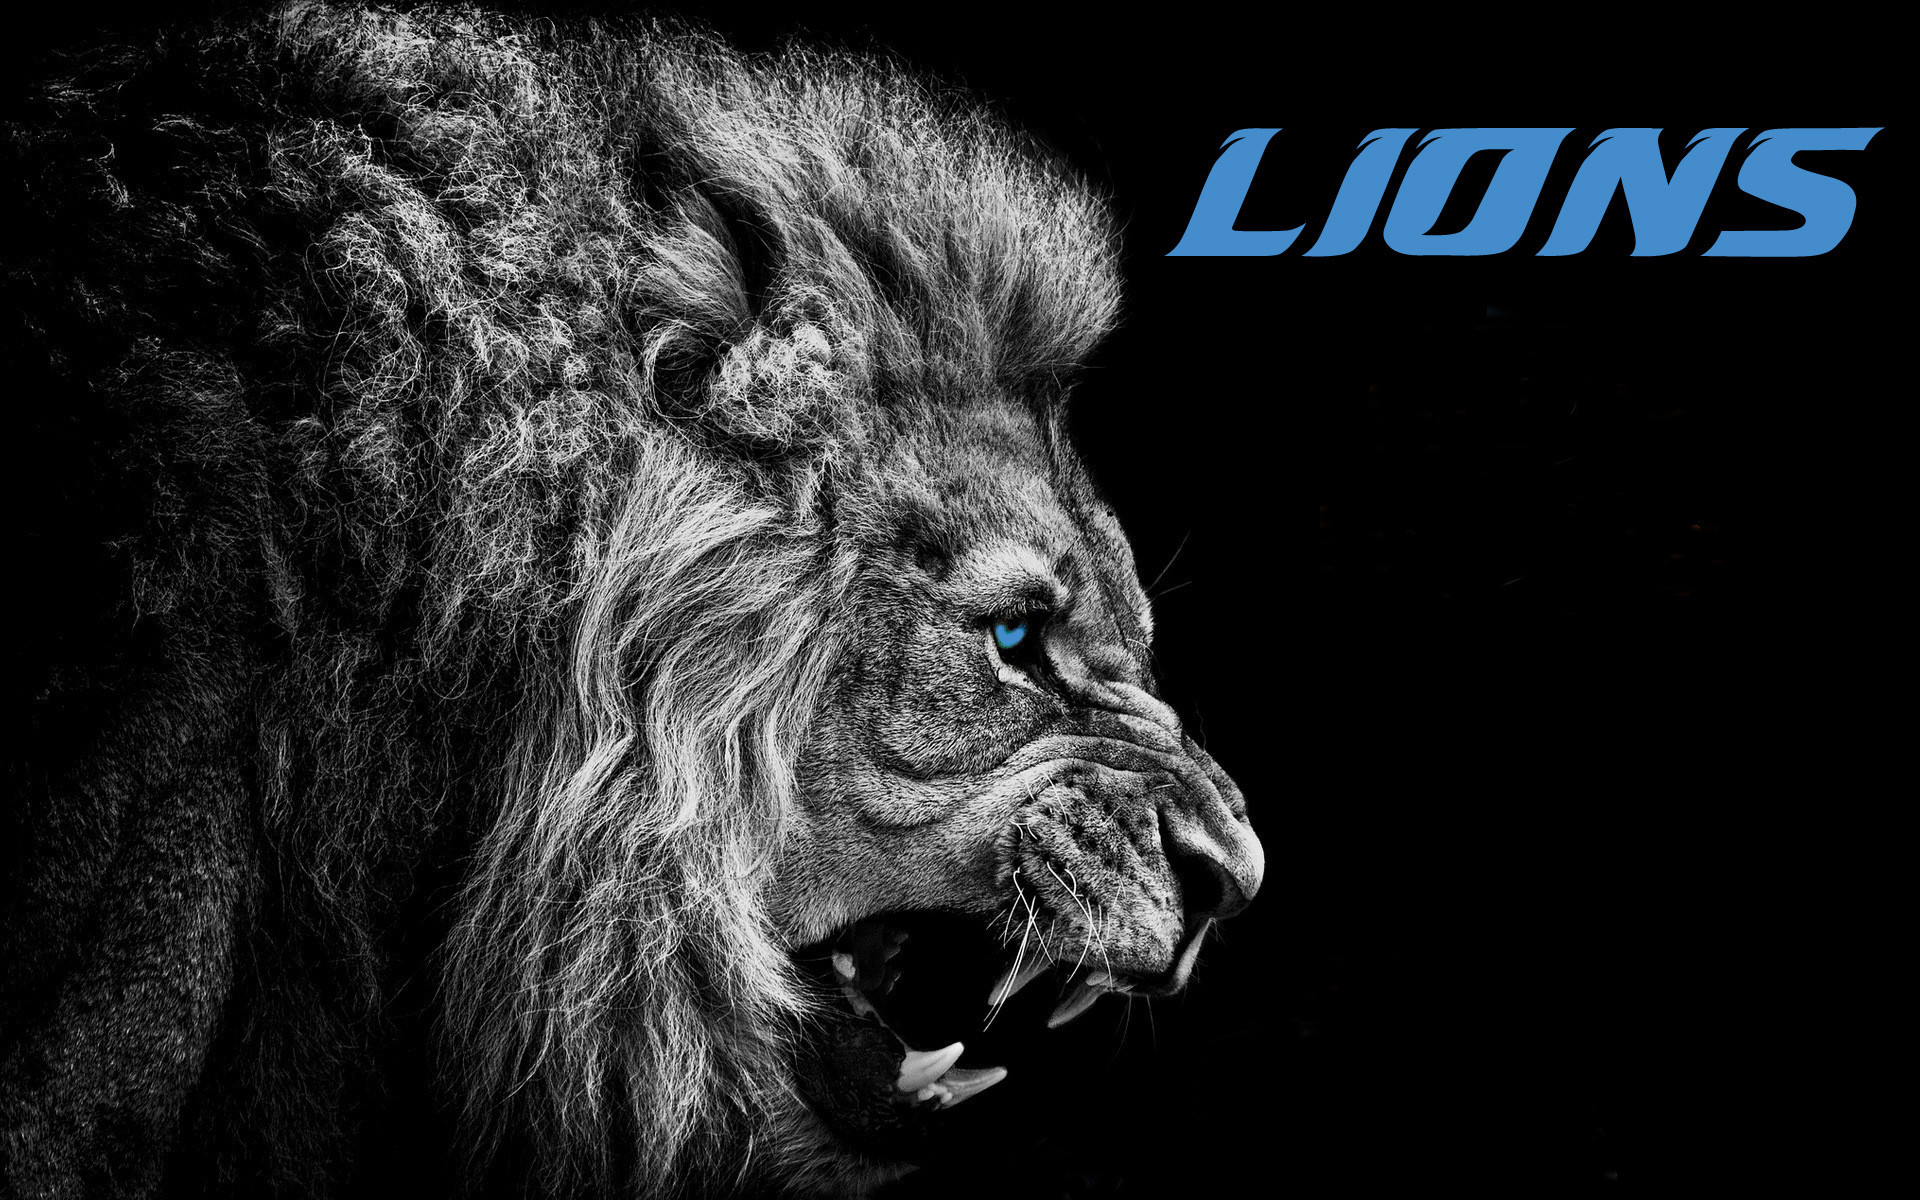 Gallery of 41 Detroit Lions Backgrounds, Wallpapers | SHunVMall